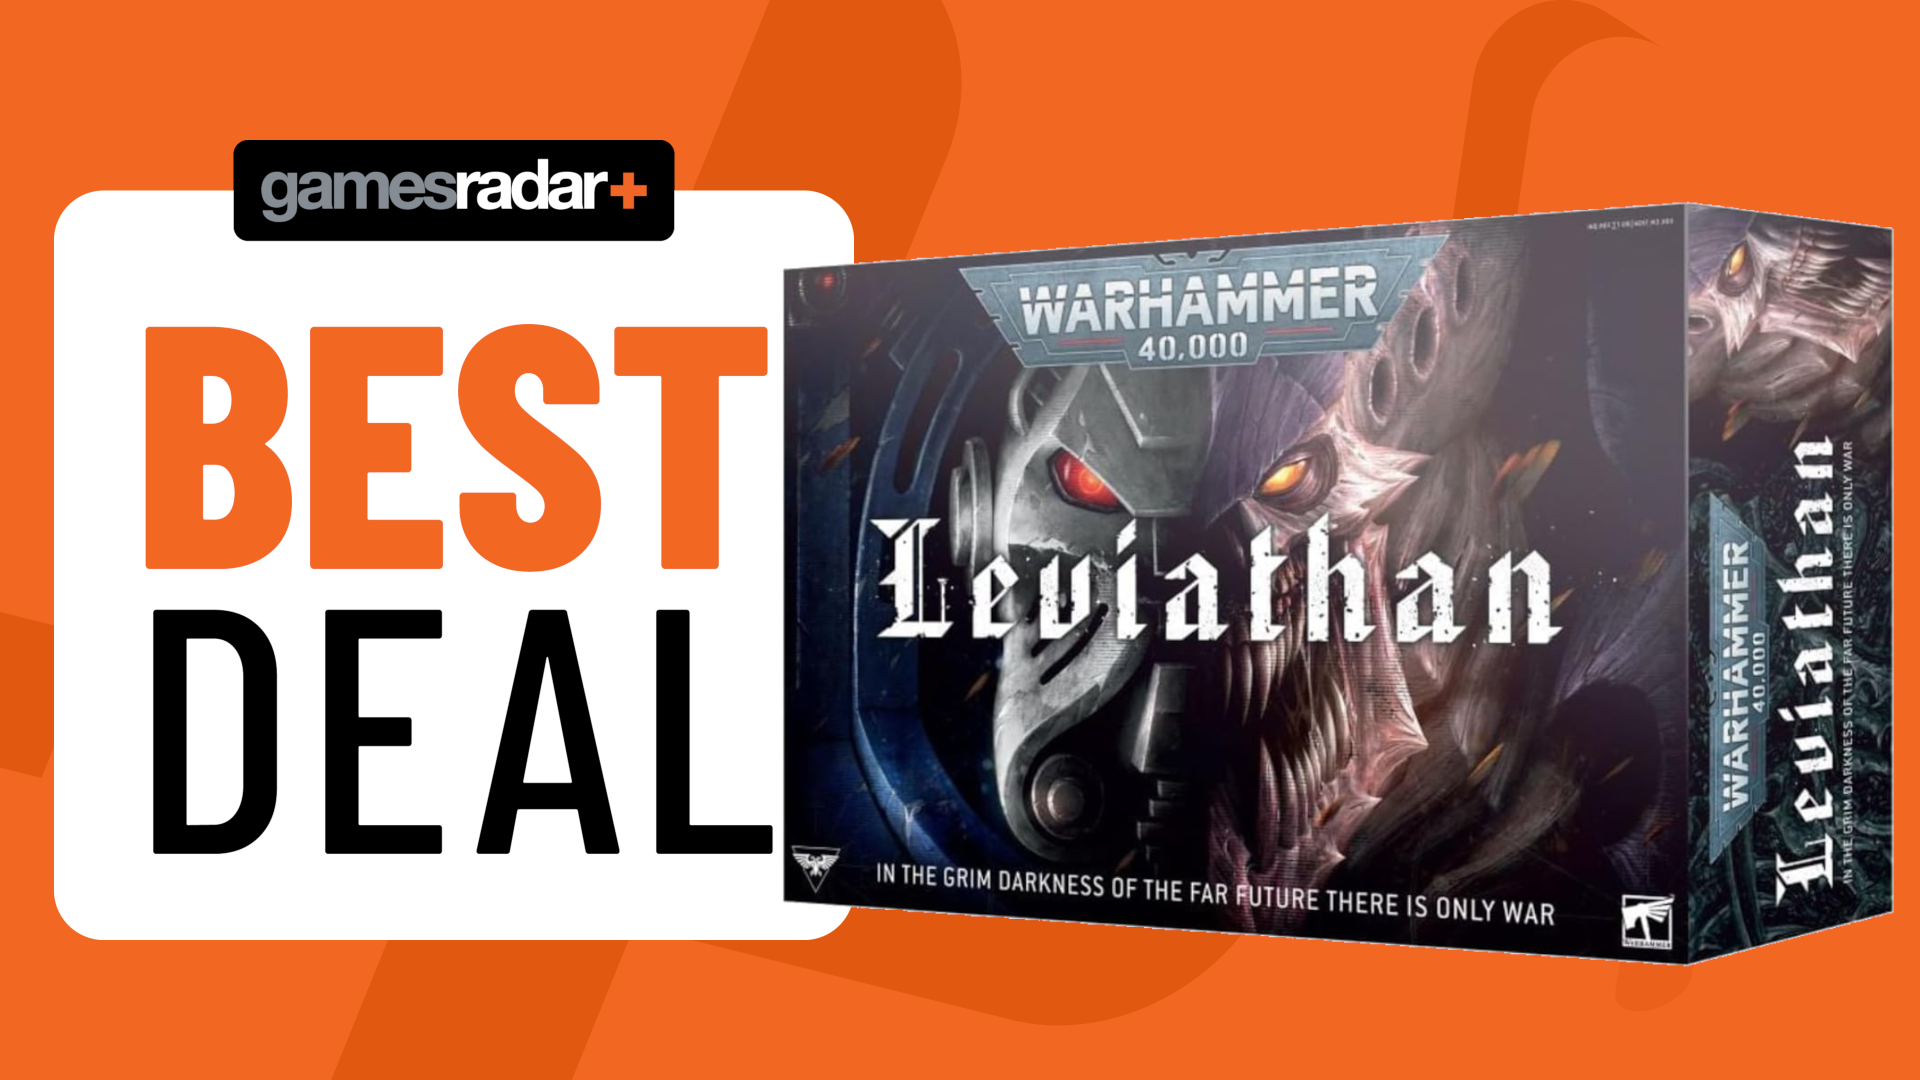 Warhammer 40K Leviathan box set gets a discount ahead of Prime Day